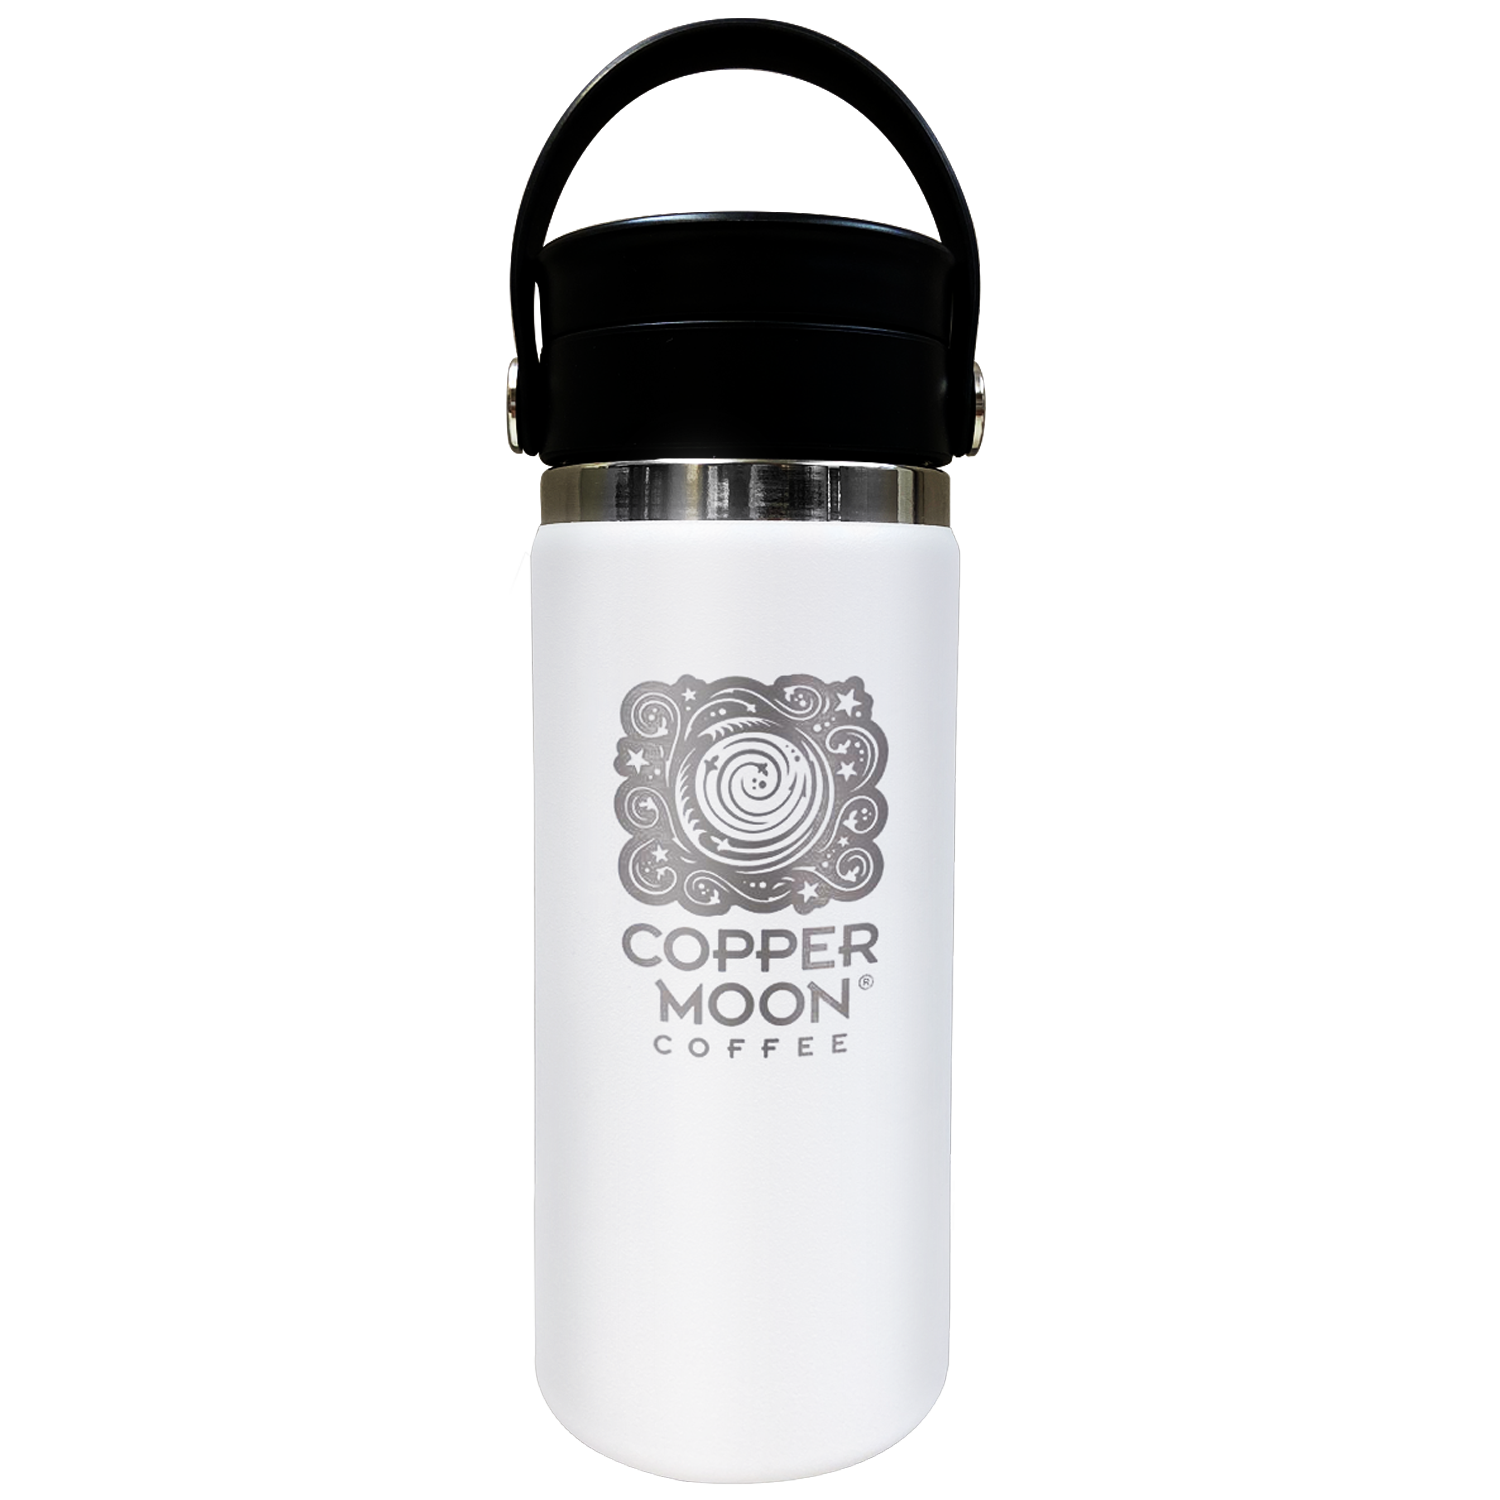 Hydro Flask Thermos Stainless Steel Water Bottle Coffee Travel Mug